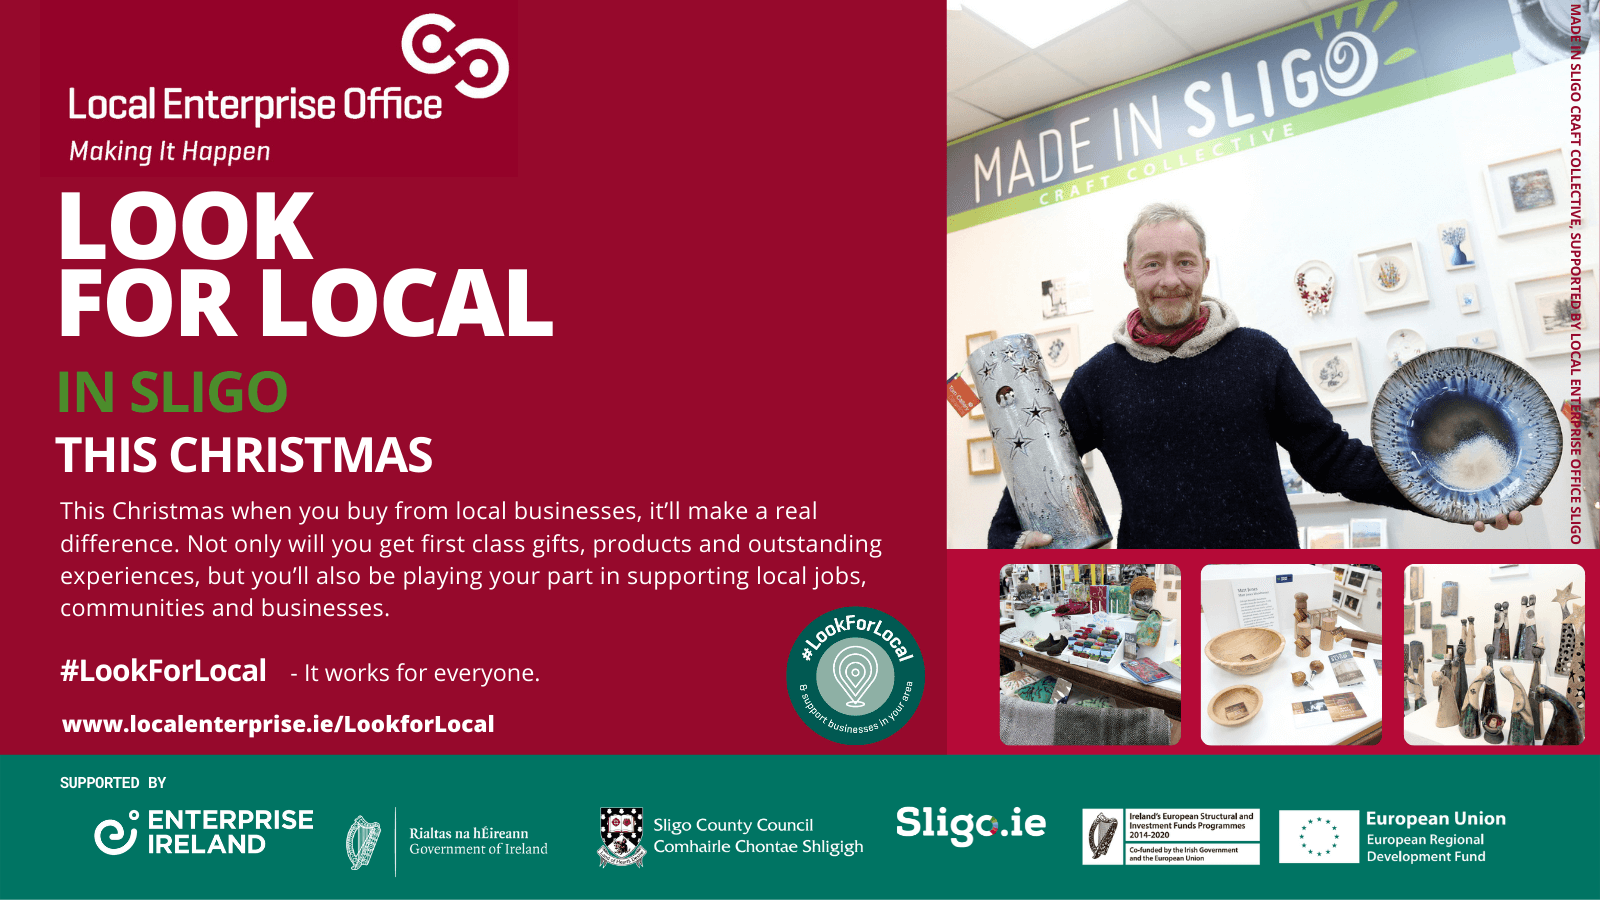 Look For Local in Sligo This Christmas to Support Small Businesses & Communities